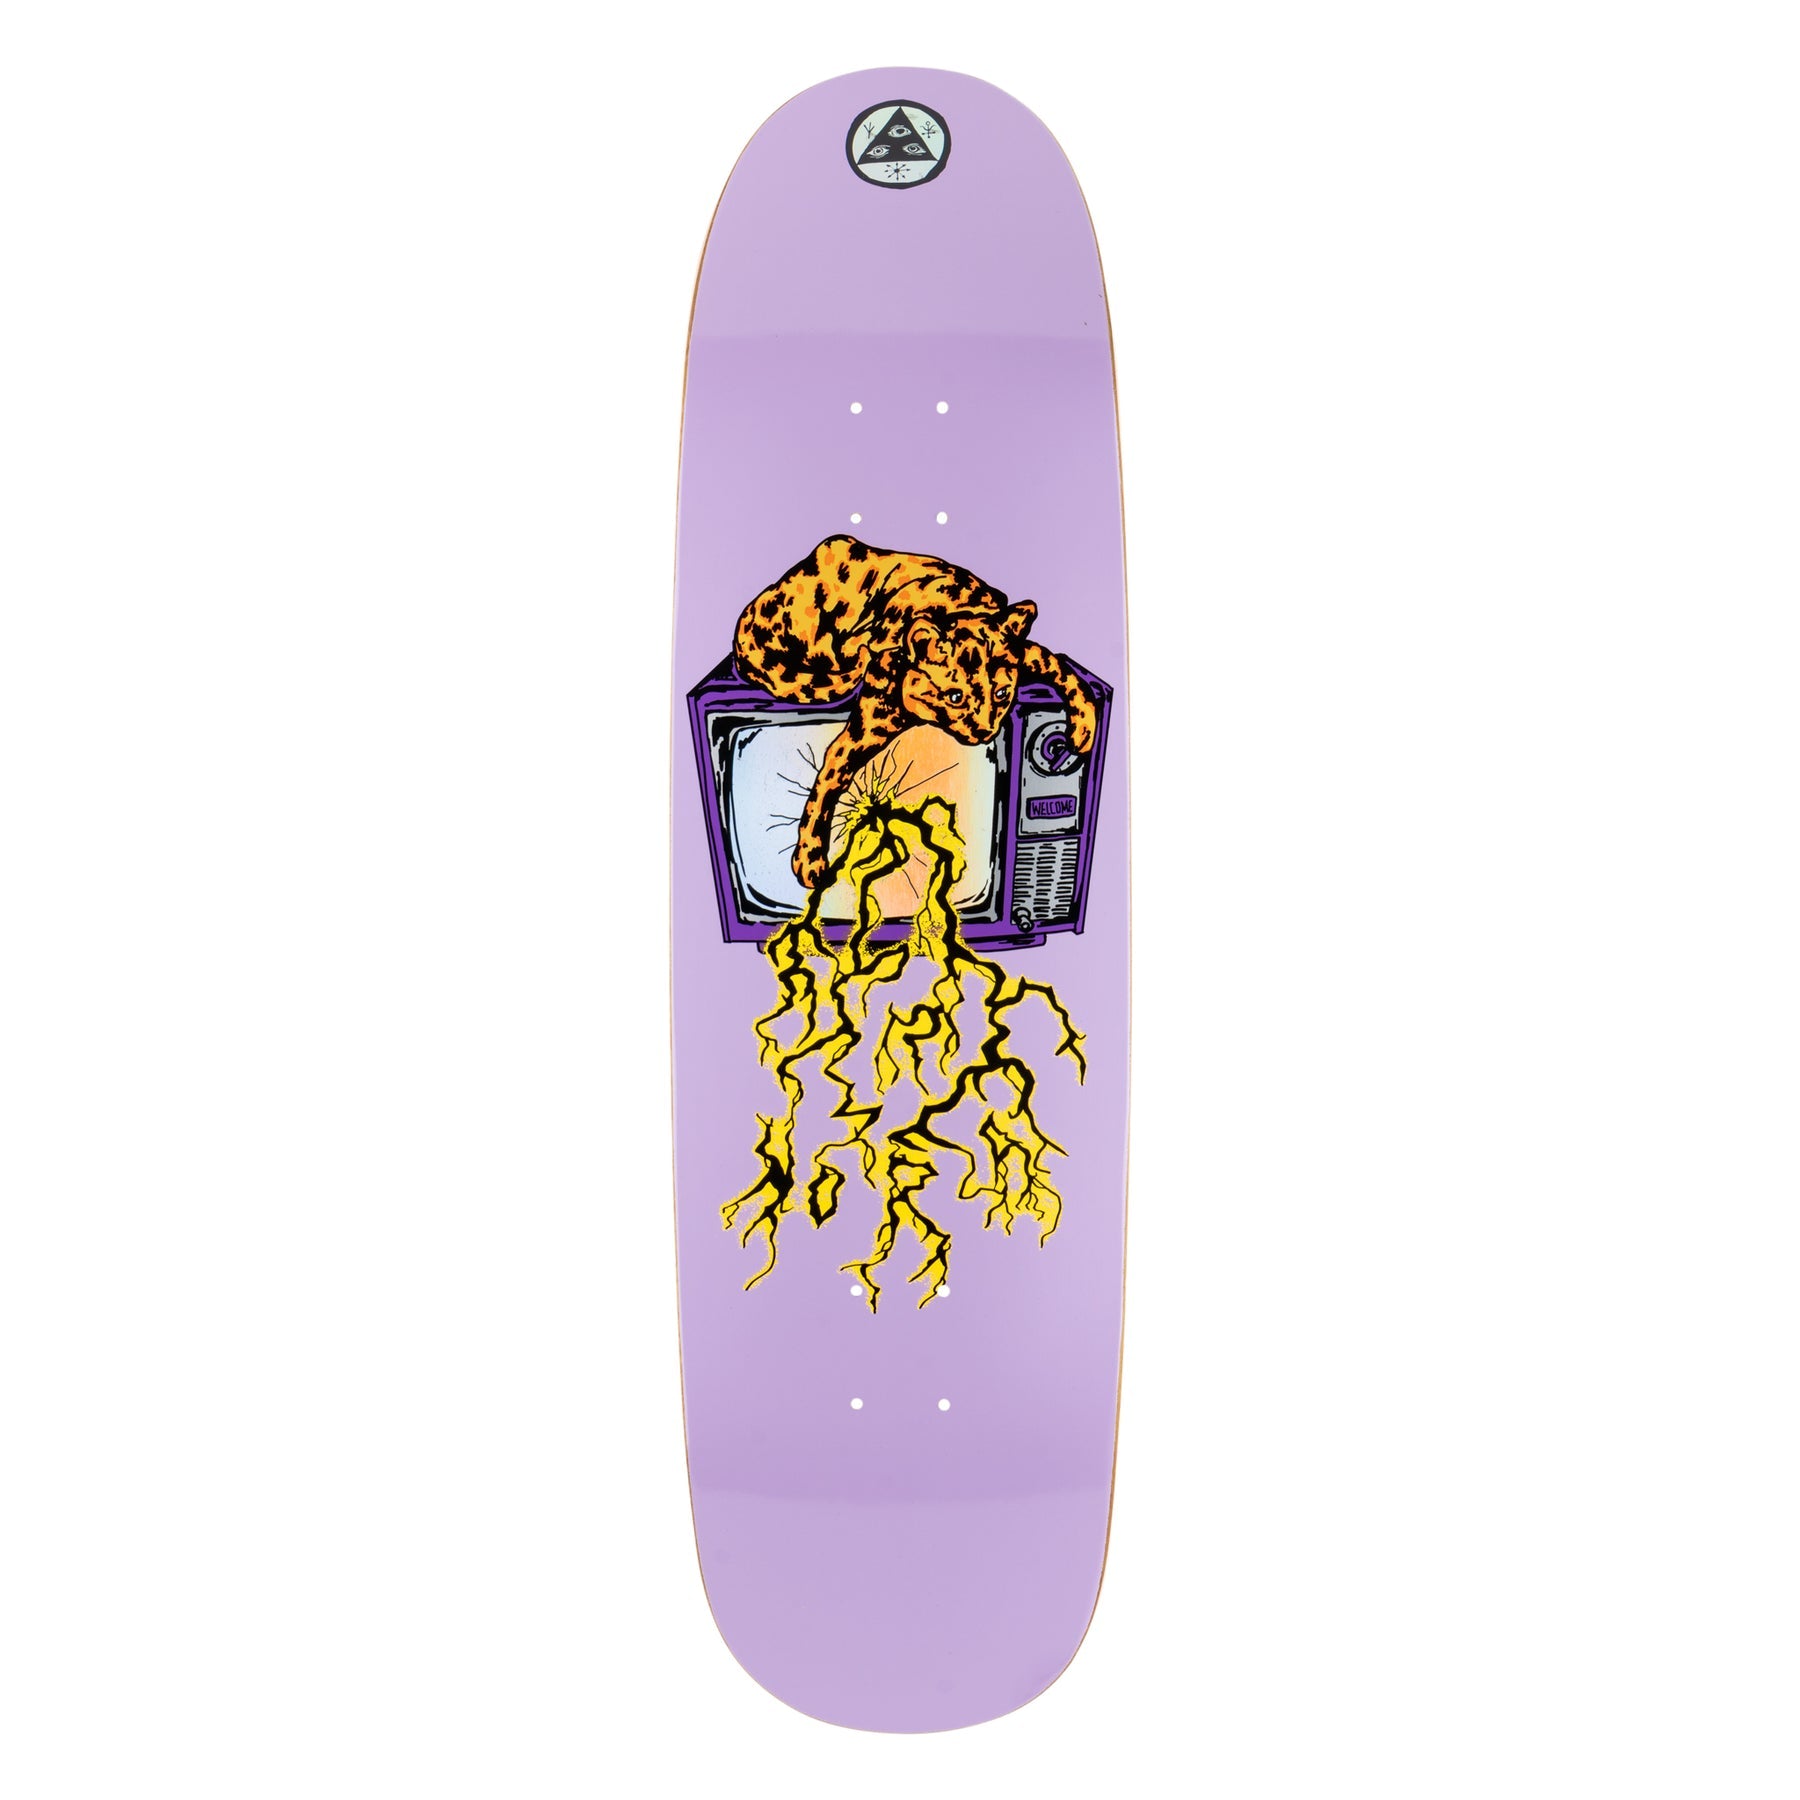 WELCOME DECK NORA STATIC LAVENDER - SPHYNX SHAPE (8.8")  